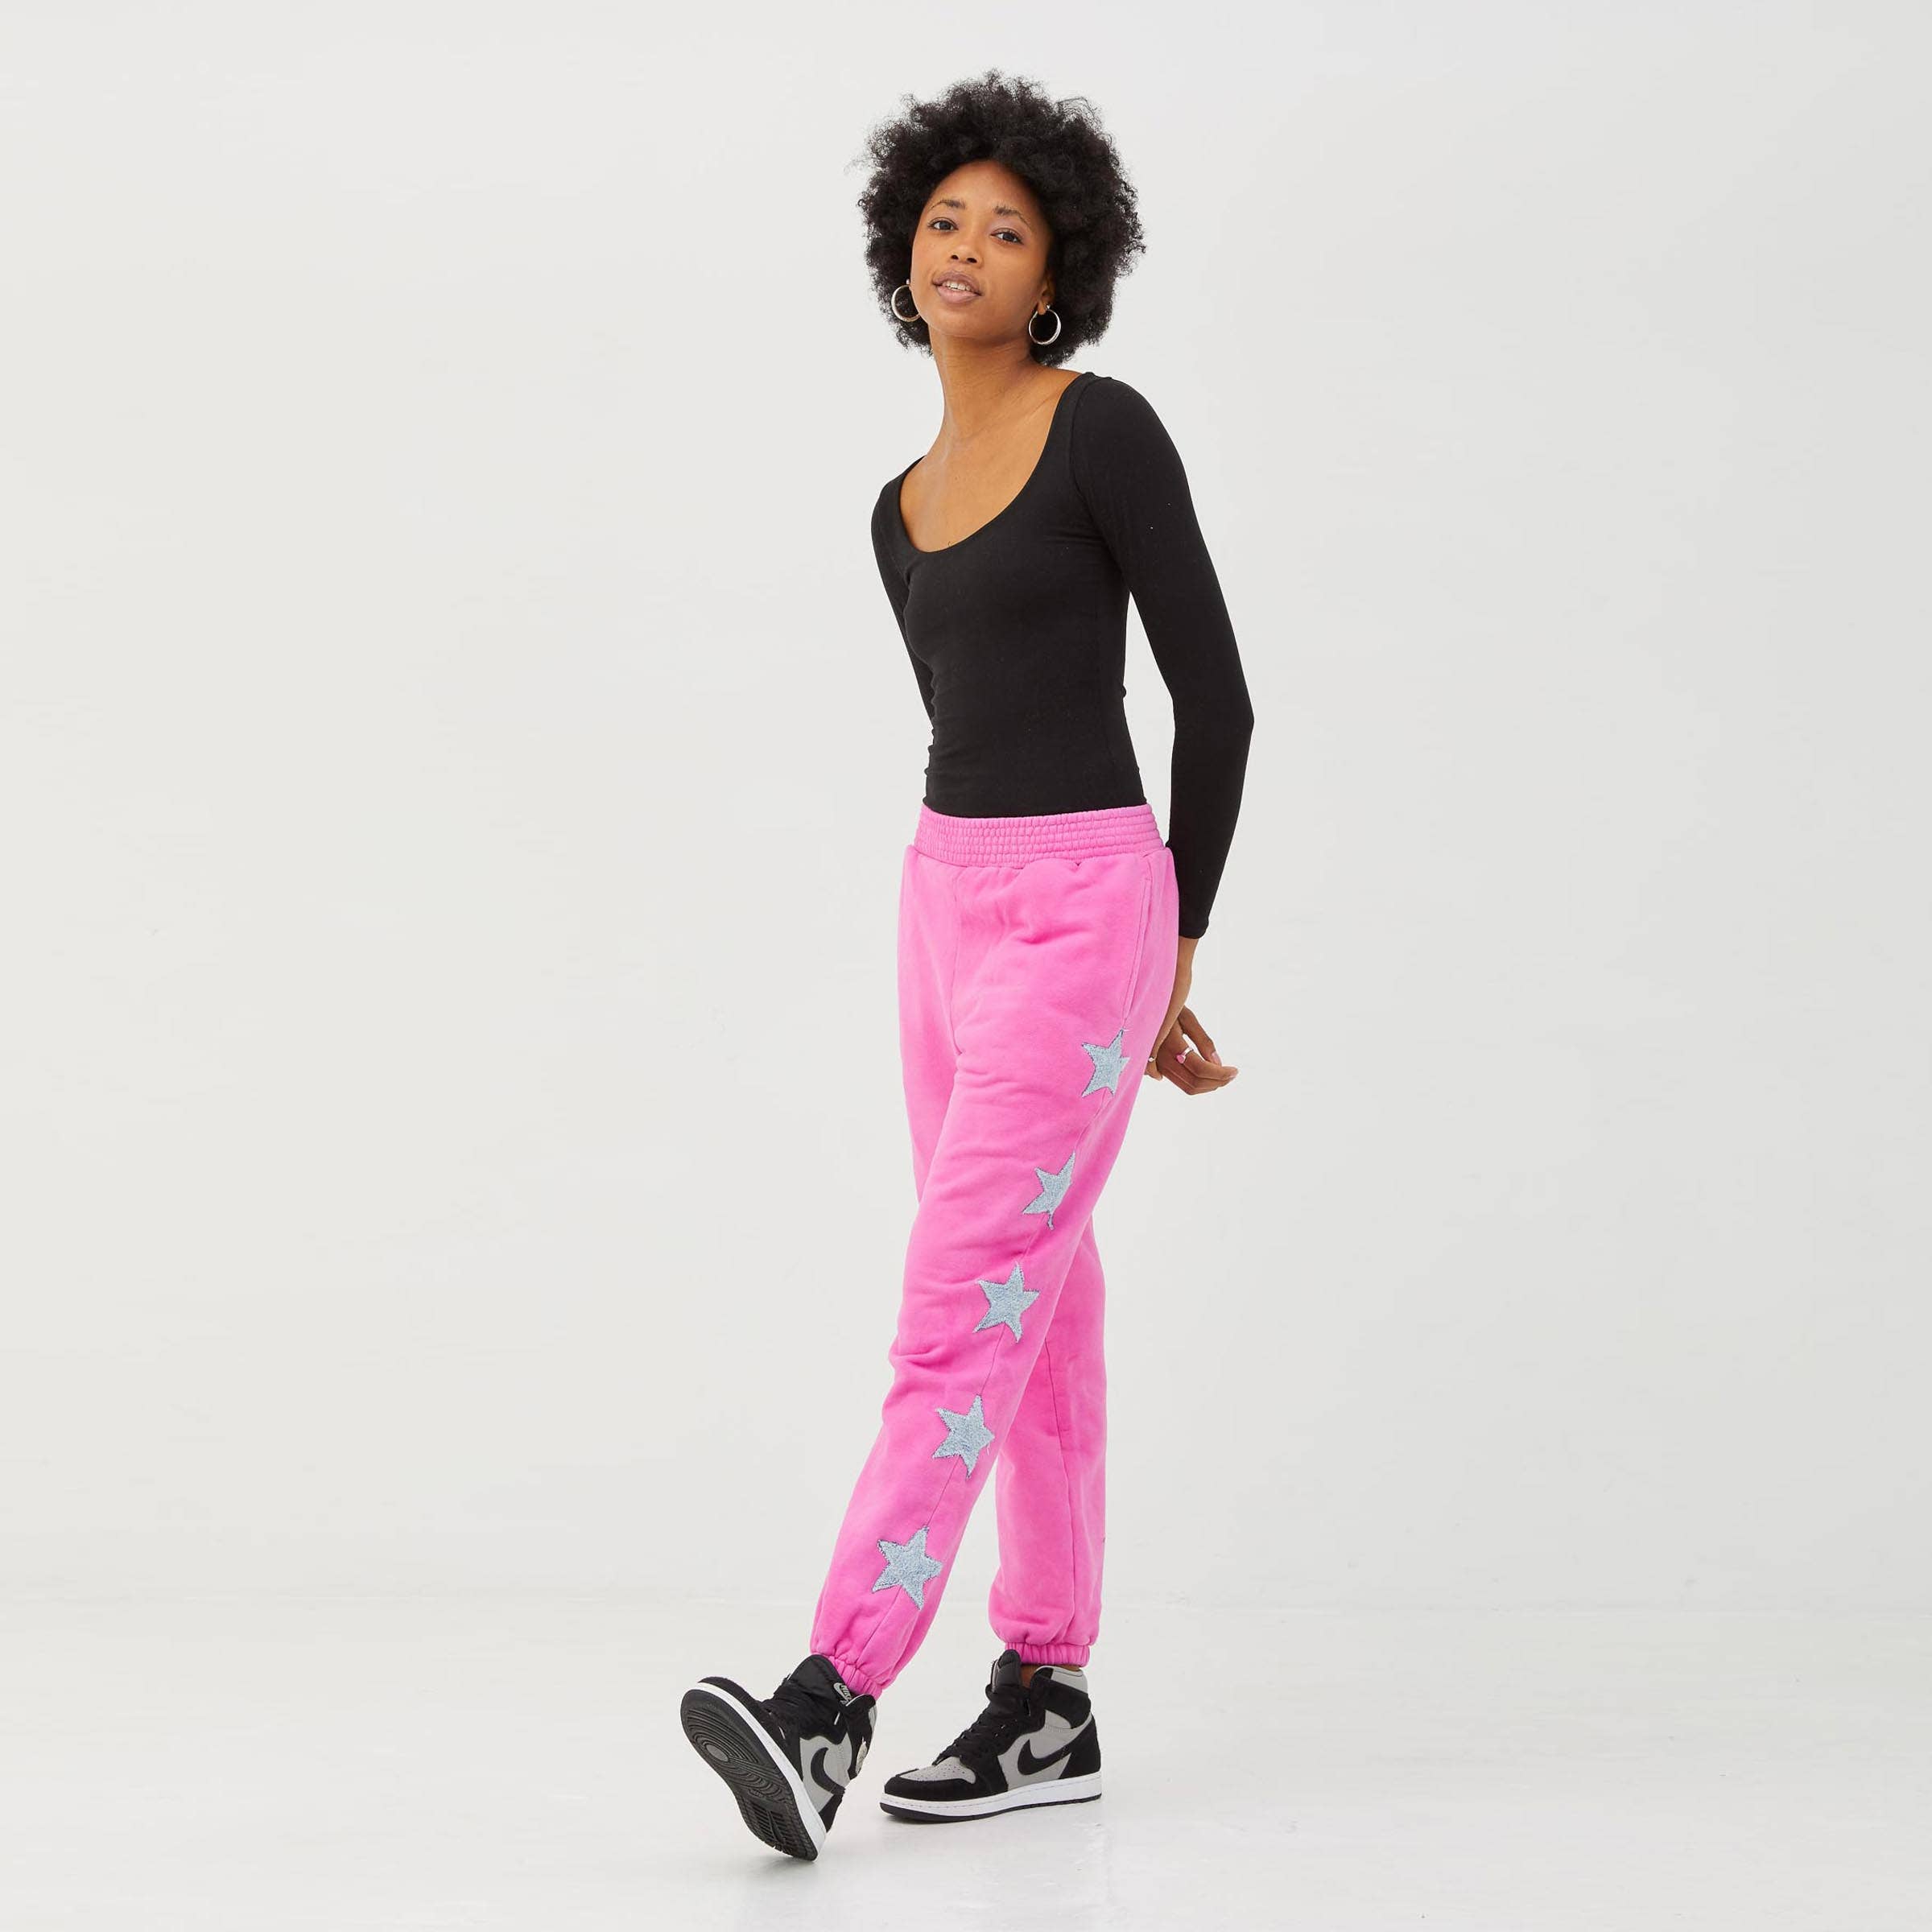 Affordable Wholesale hot pink sweatpants For Trendsetting Looks 